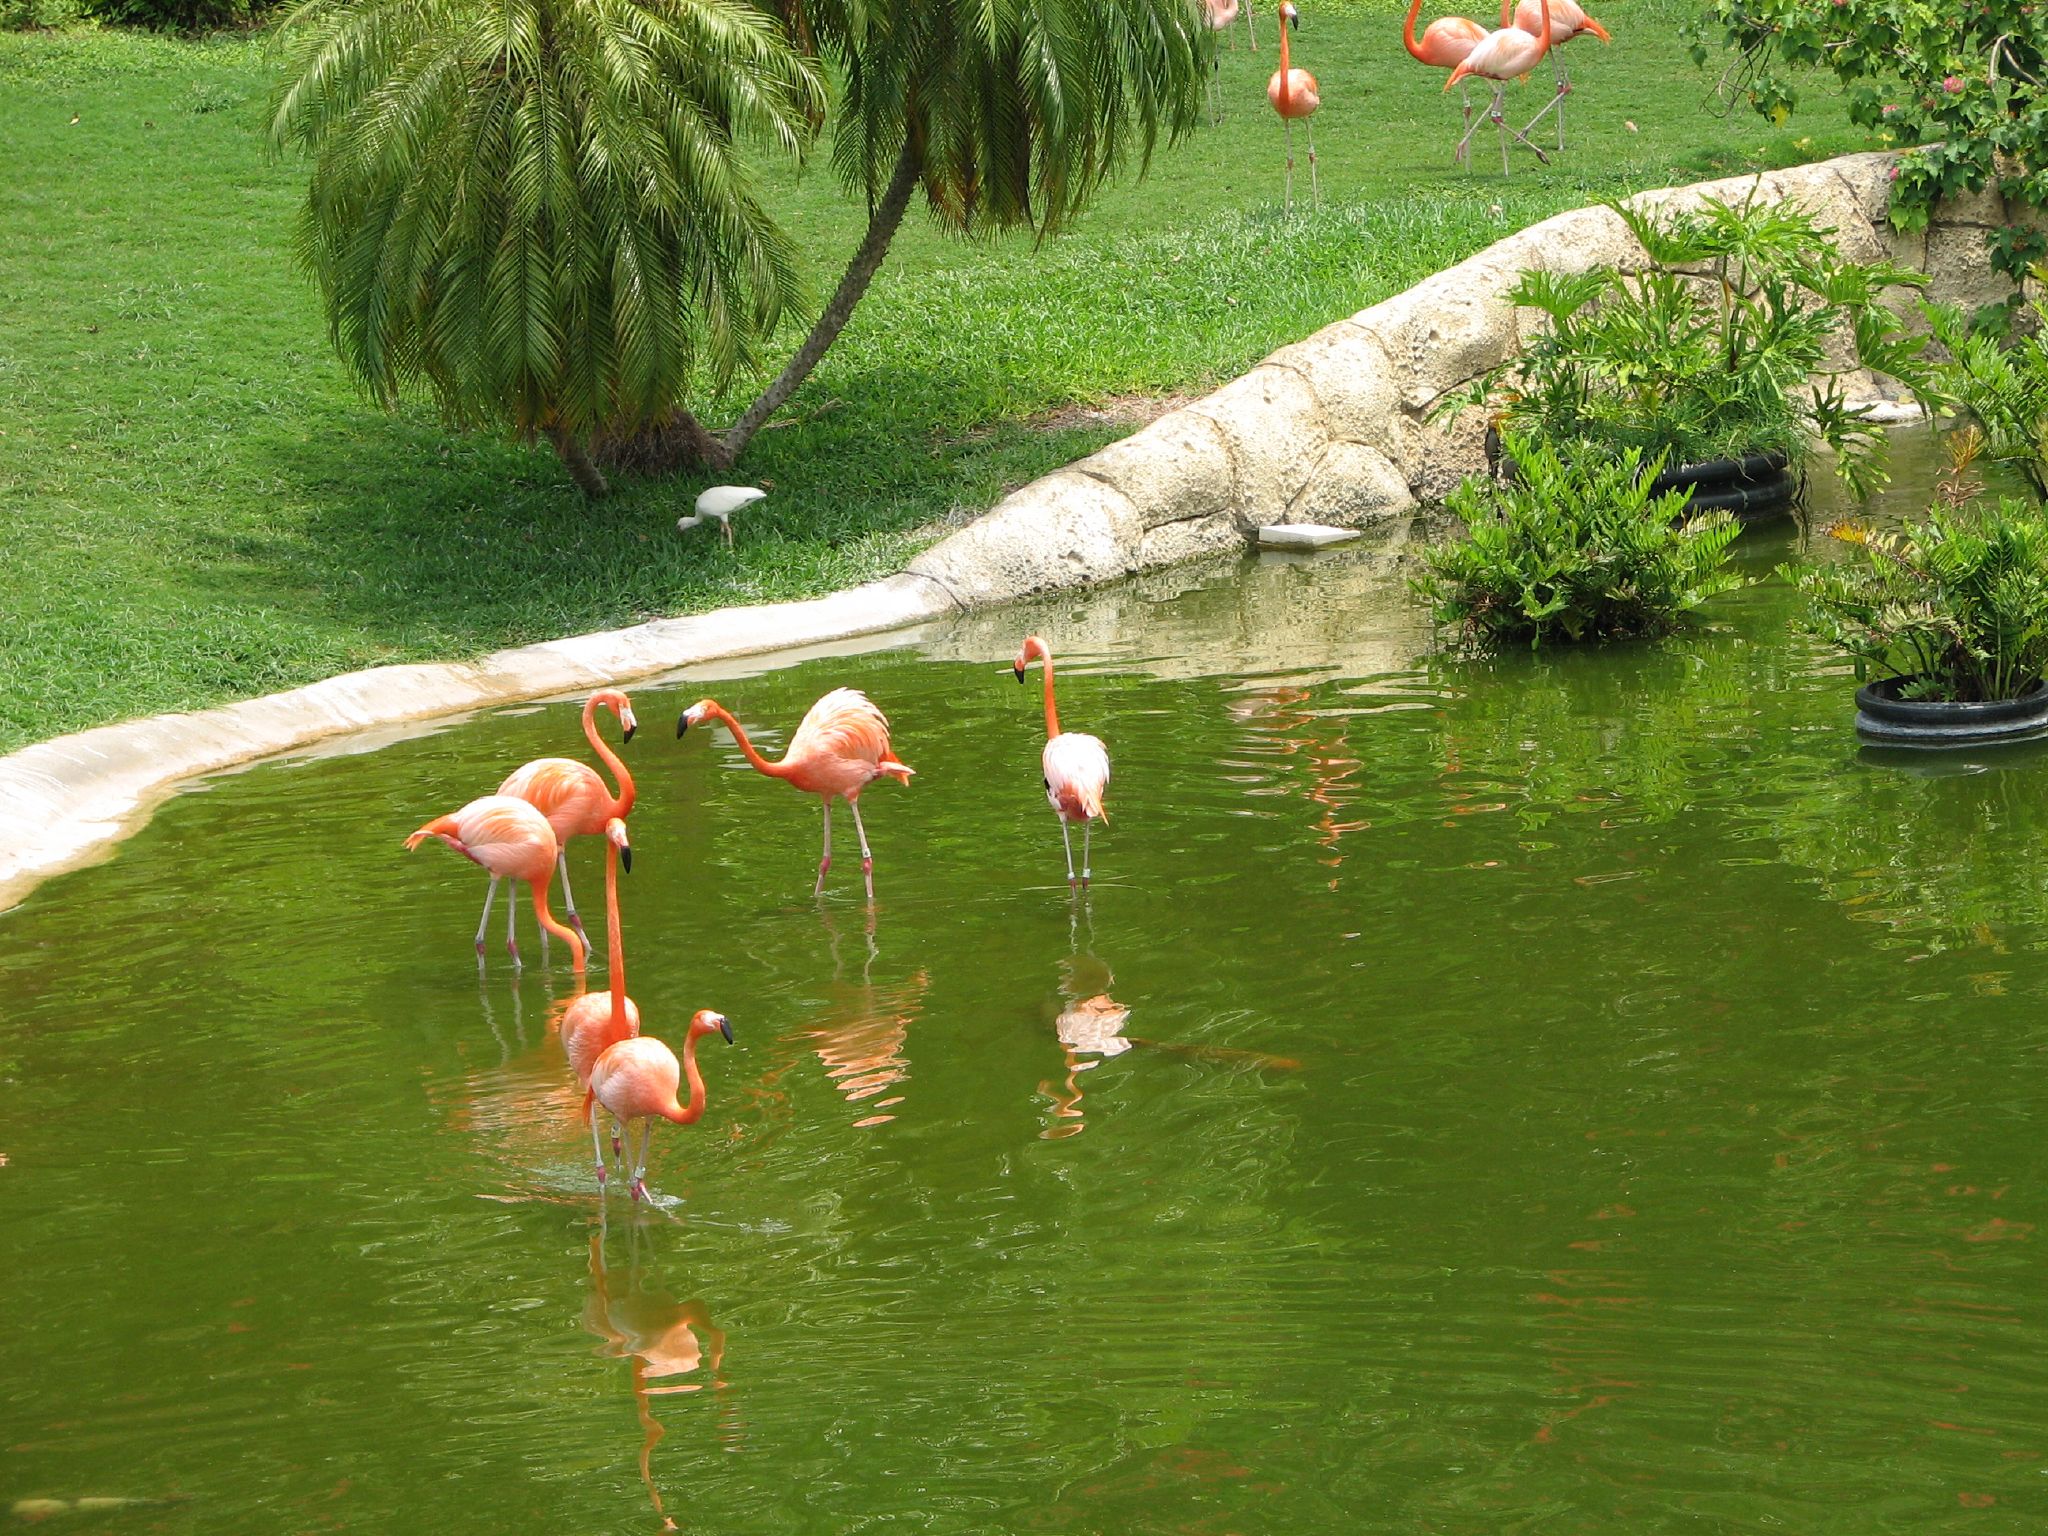 the four flamingos are standing in water looking at each other